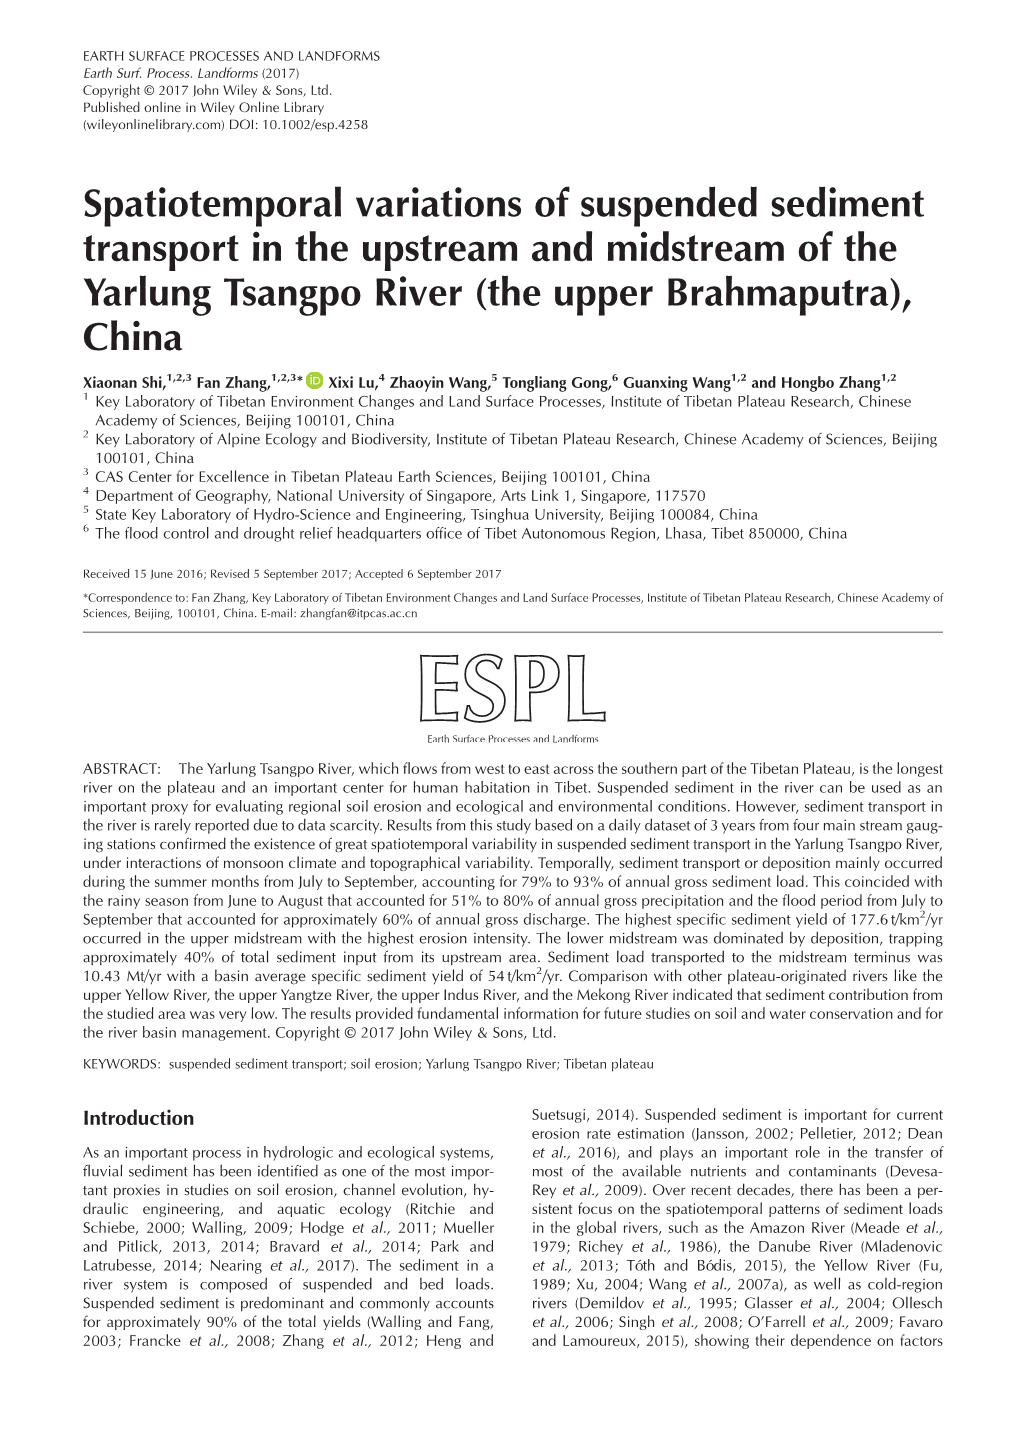 Spatiotemporal Variations of Suspended Sediment Transport in the Upstream and Midstream of the Yarlung Tsangpo River (The Upper Brahmaputra), China